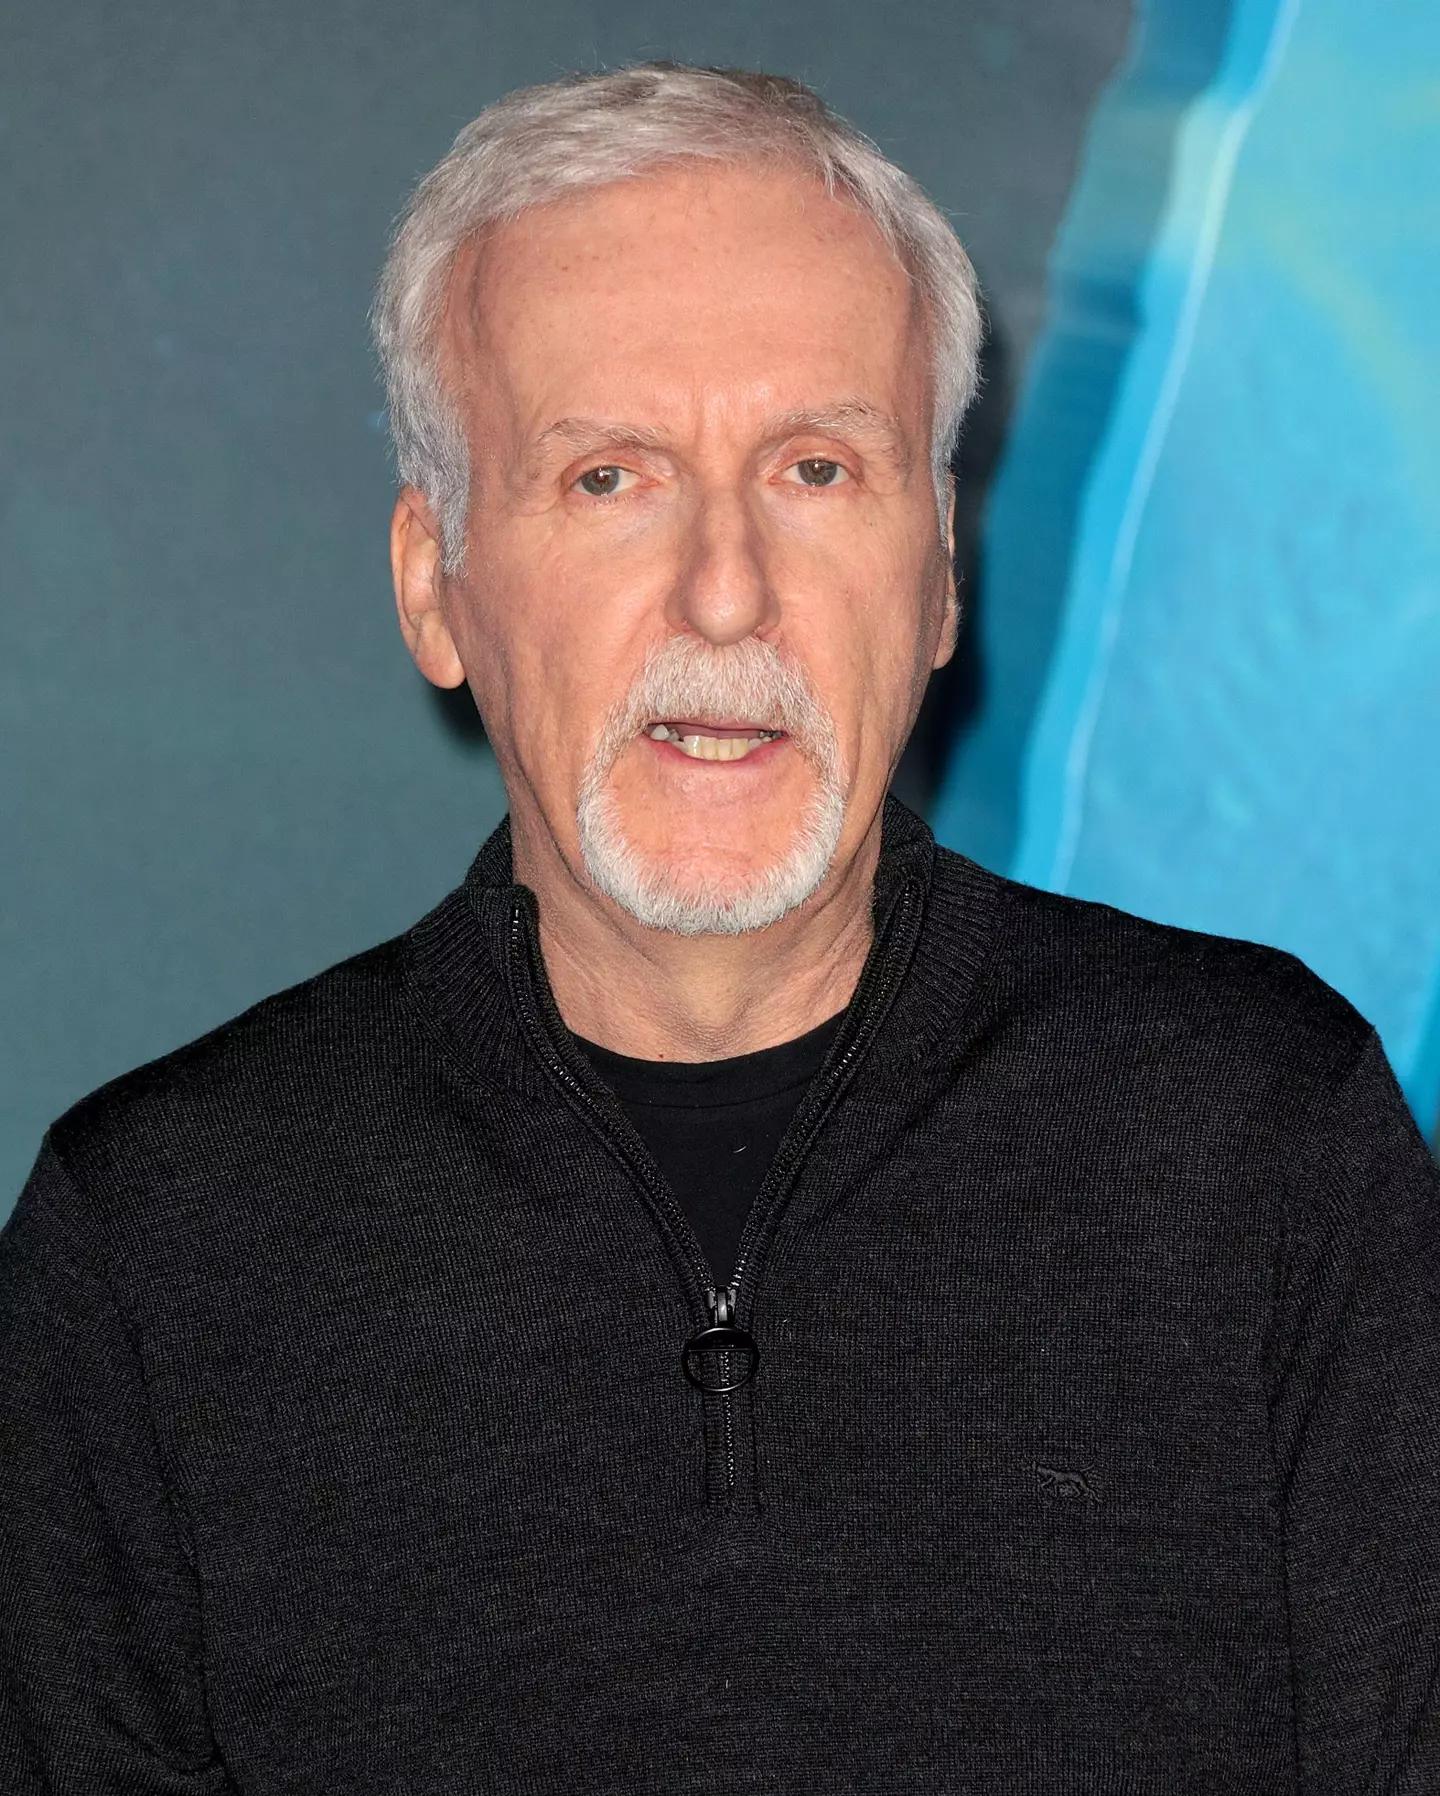 James Cameron needed The Way of Water to make $2 billion. Mission accomplished.